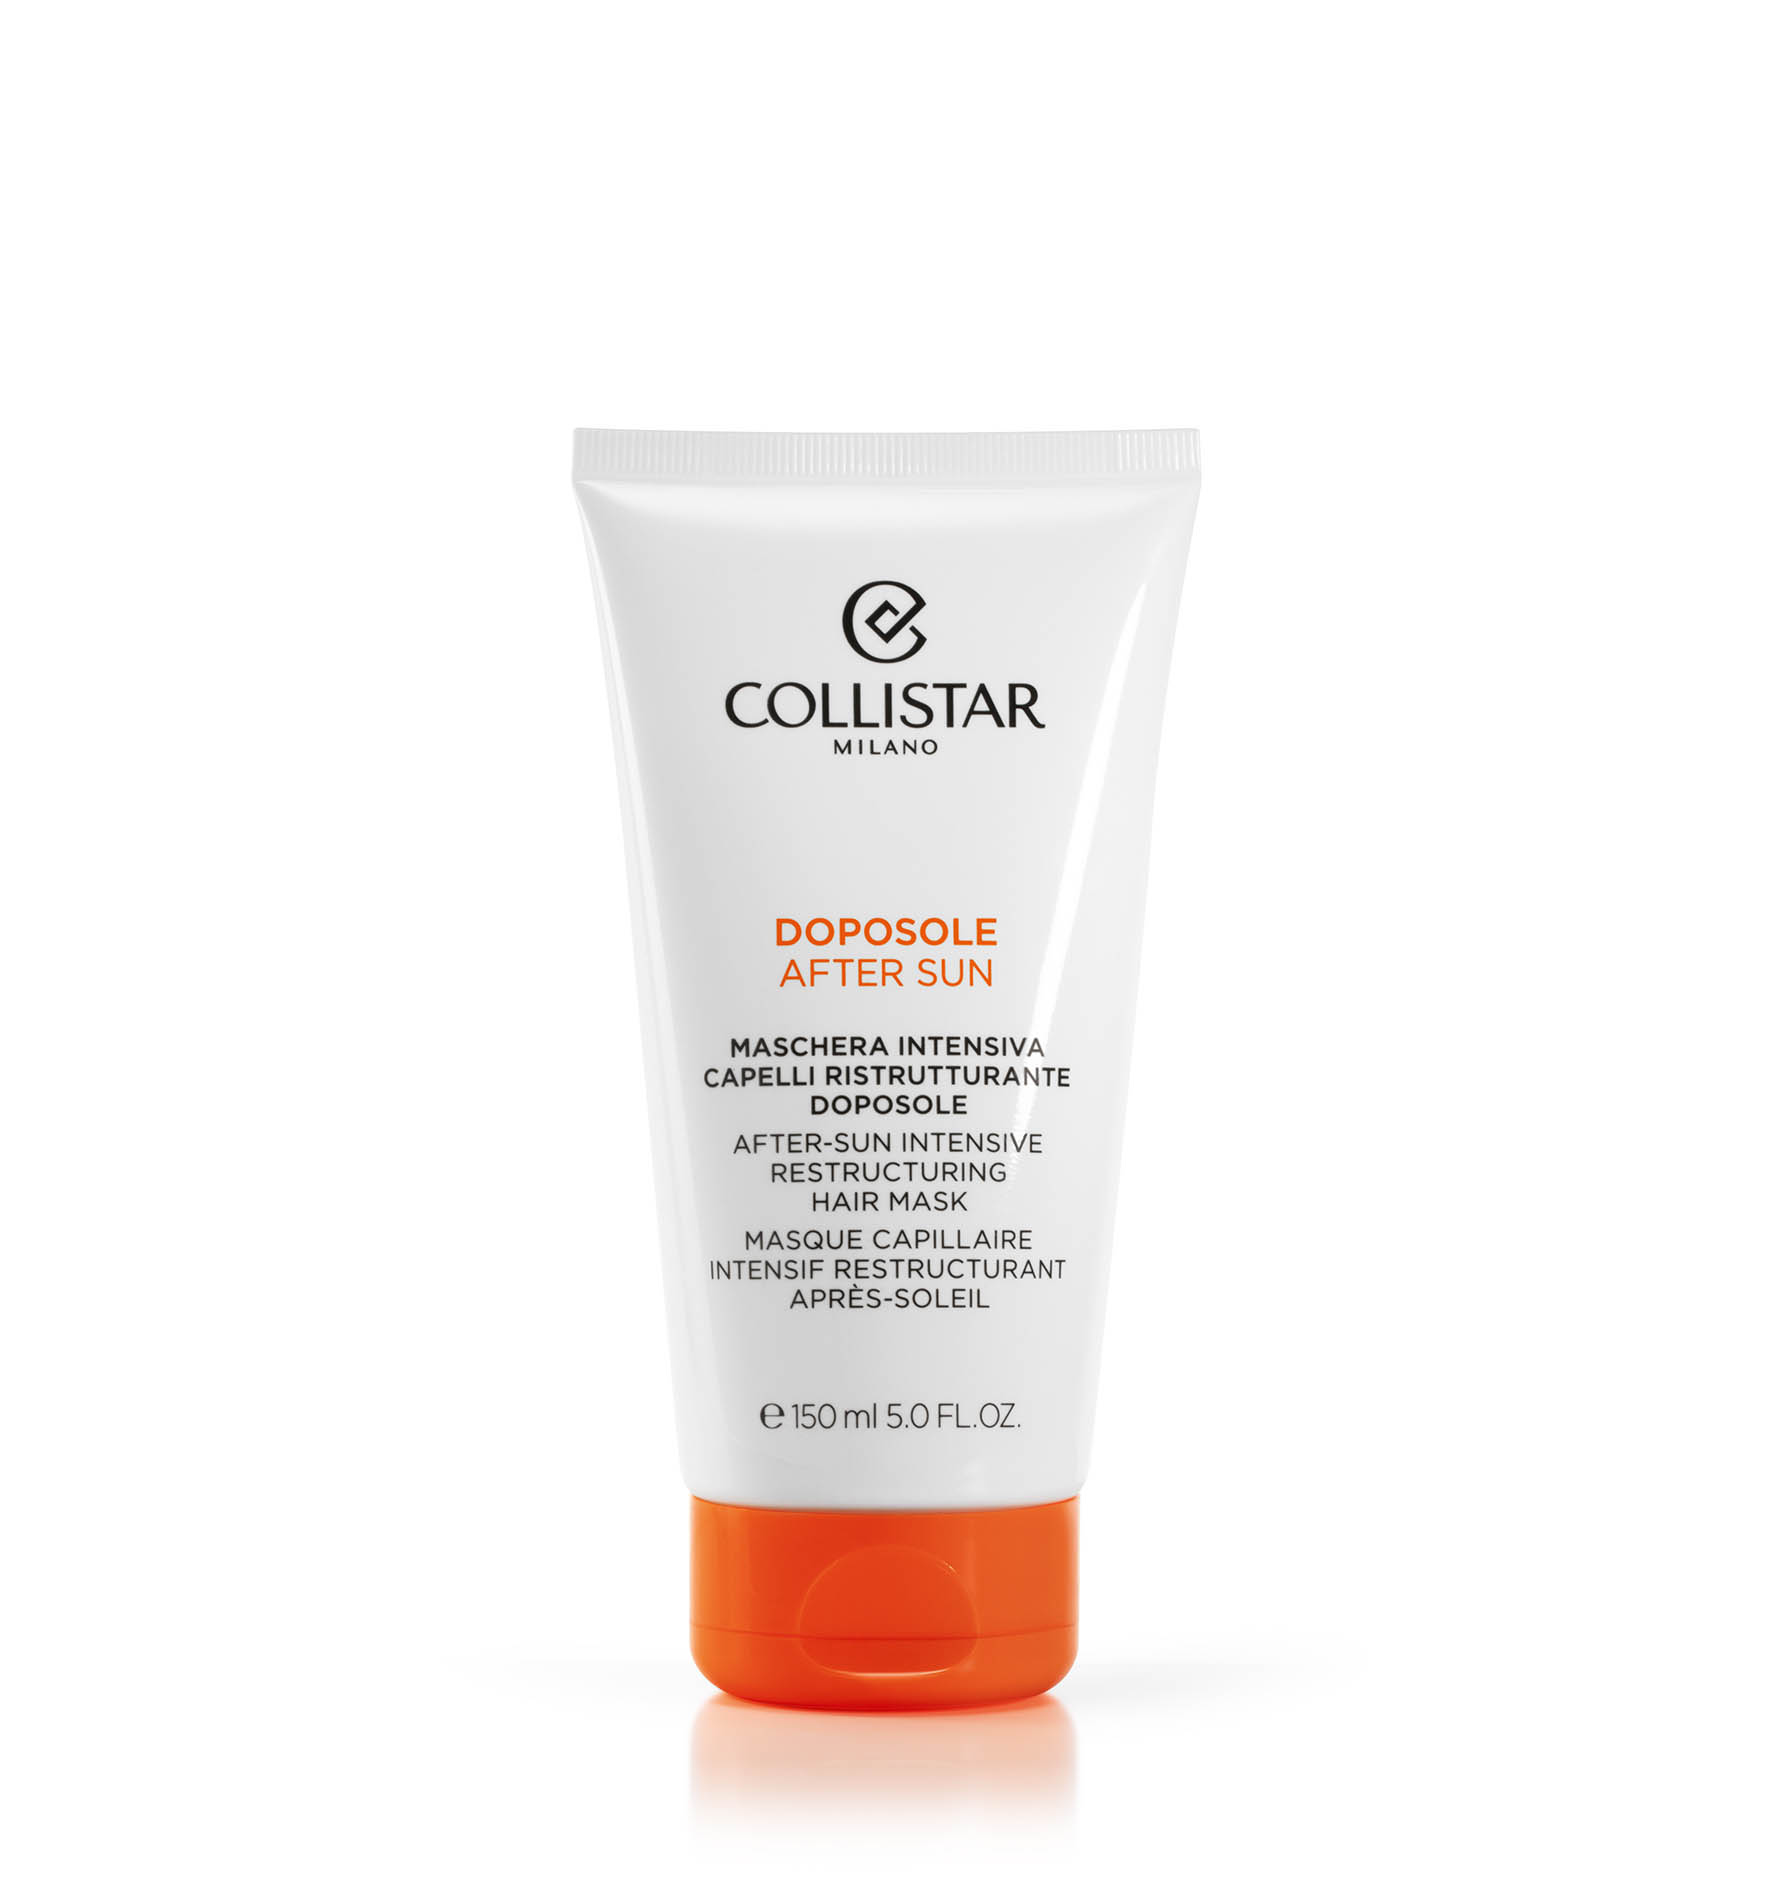 AFTER-SUN INTENSIVE RESTRUCTURING HAIR MASK - Masks and conditioners  | Collistar - Shop Online Ufficiale